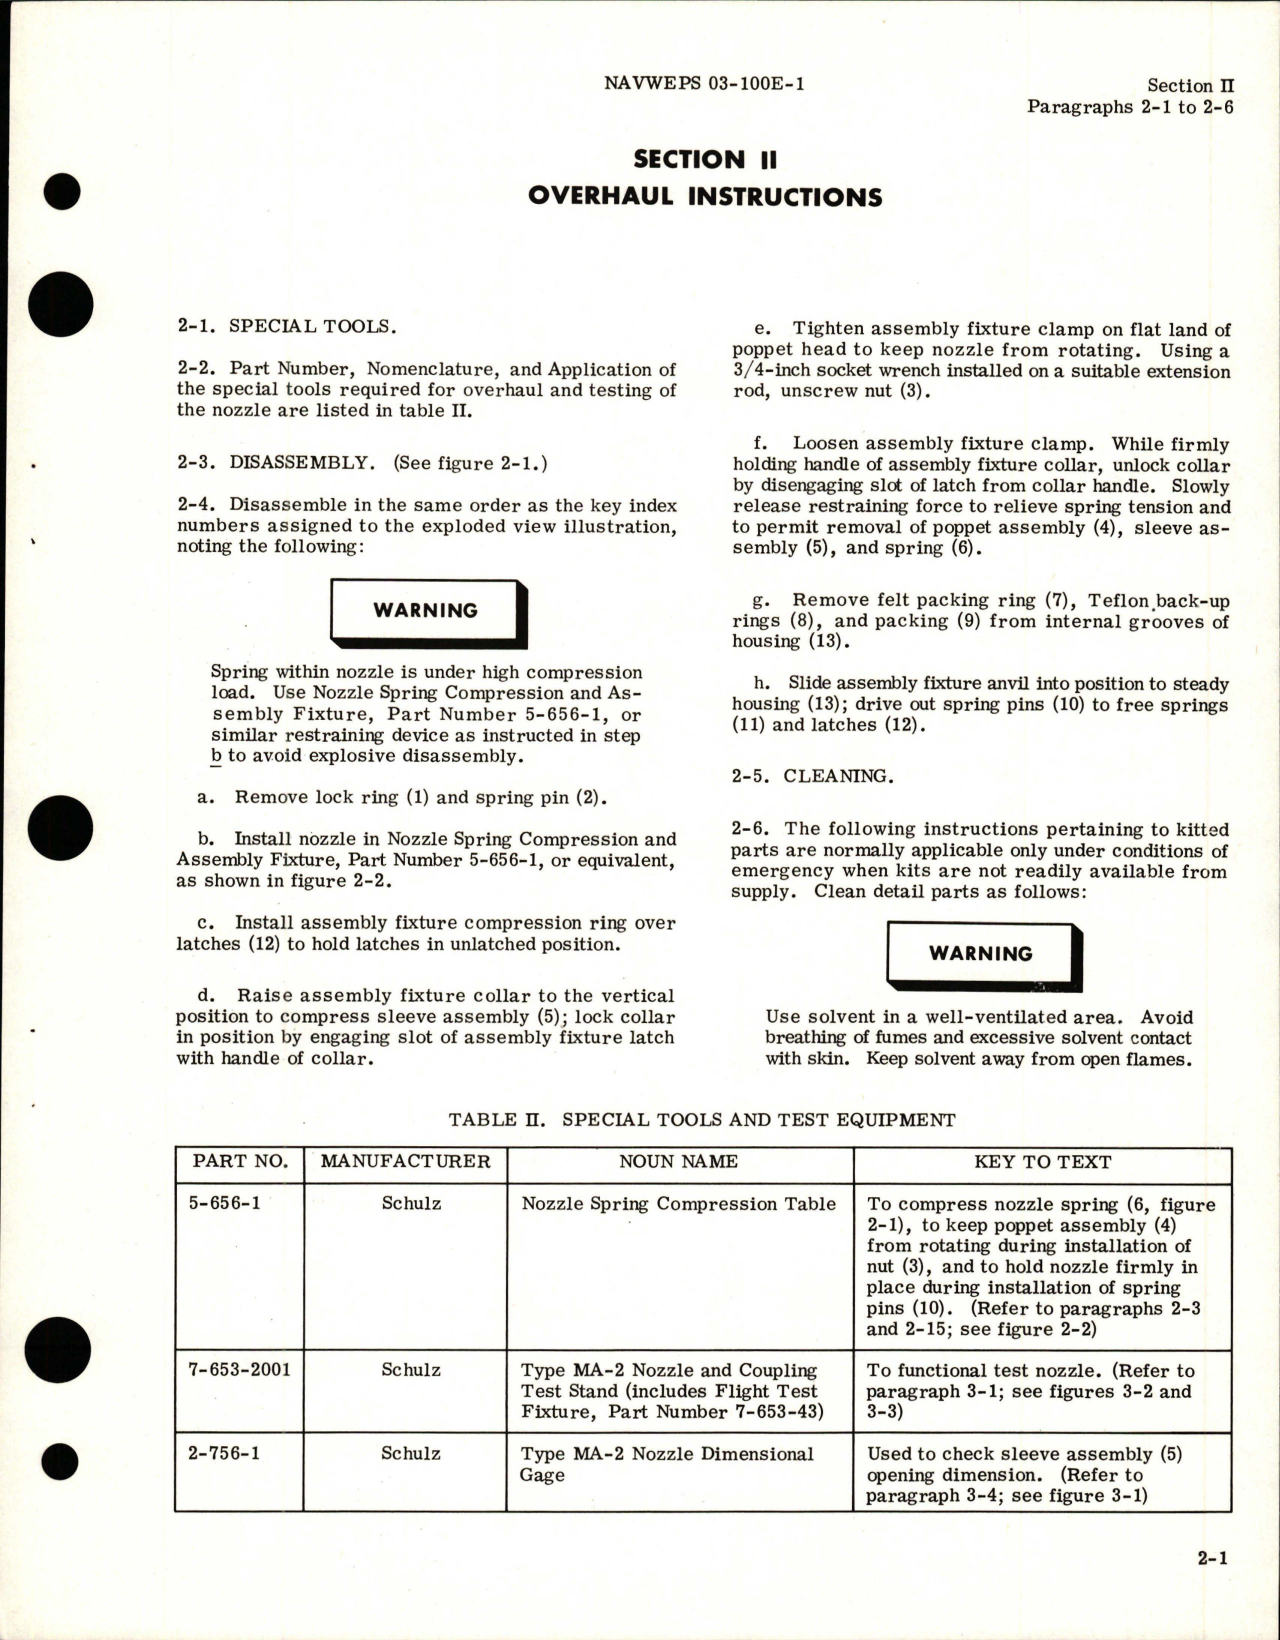 Sample page 7 from AirCorps Library document: Overhaul Instructions for Aerial Refueling Nozzles - Type MA-2 - Part 8-958-101 and 8-958-1 